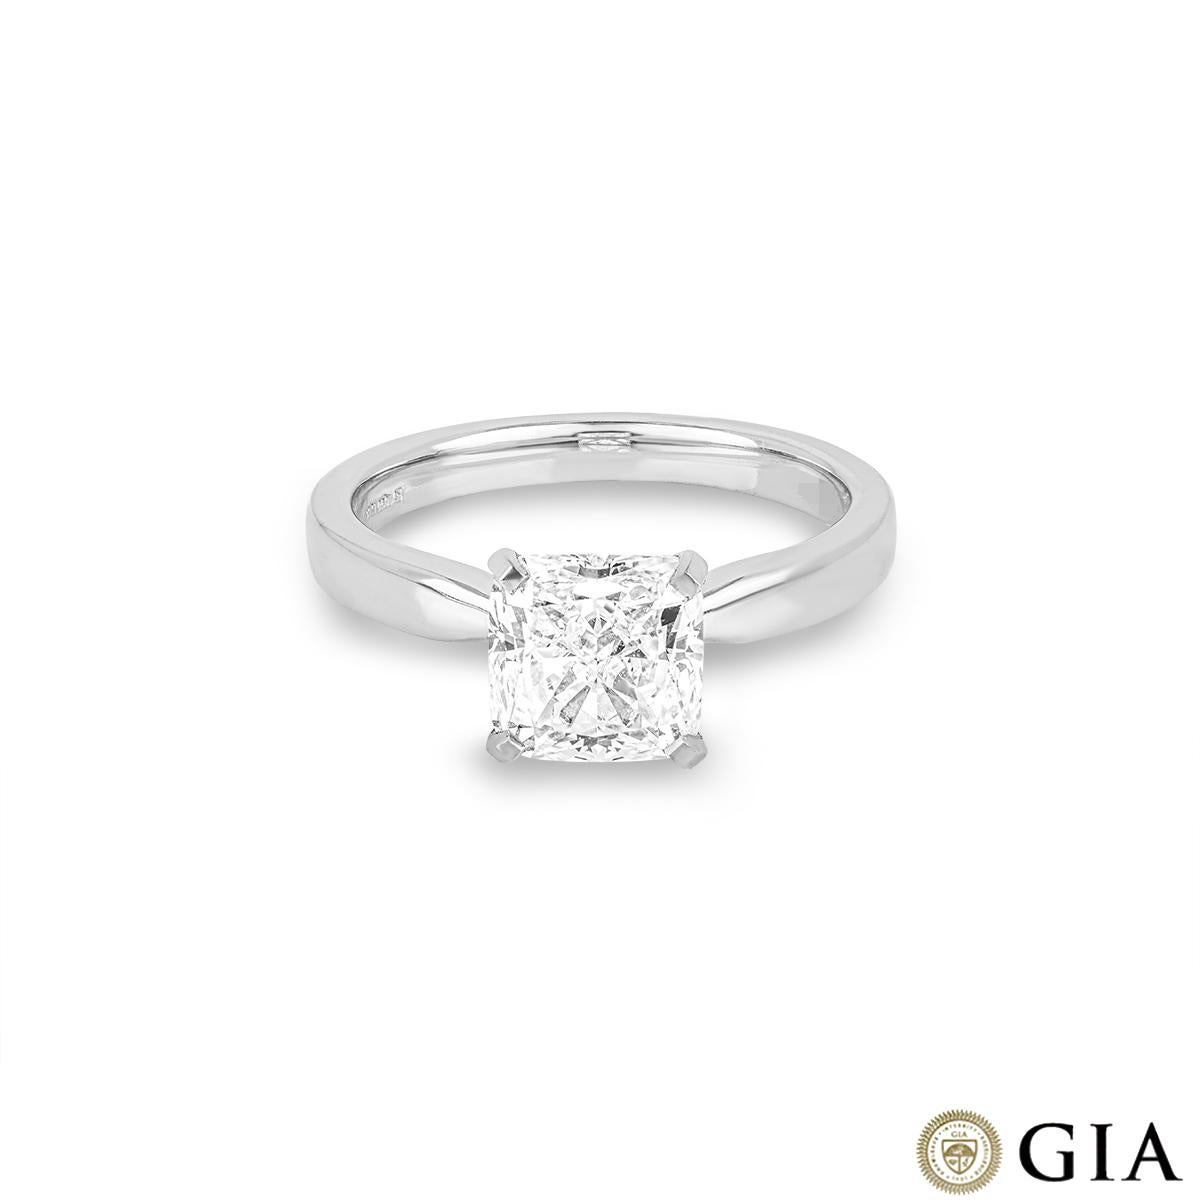 GIA Certified Platinum Cushion Cut Diamond Ring 2.07ct H/VVS2 In New Condition For Sale In London, GB